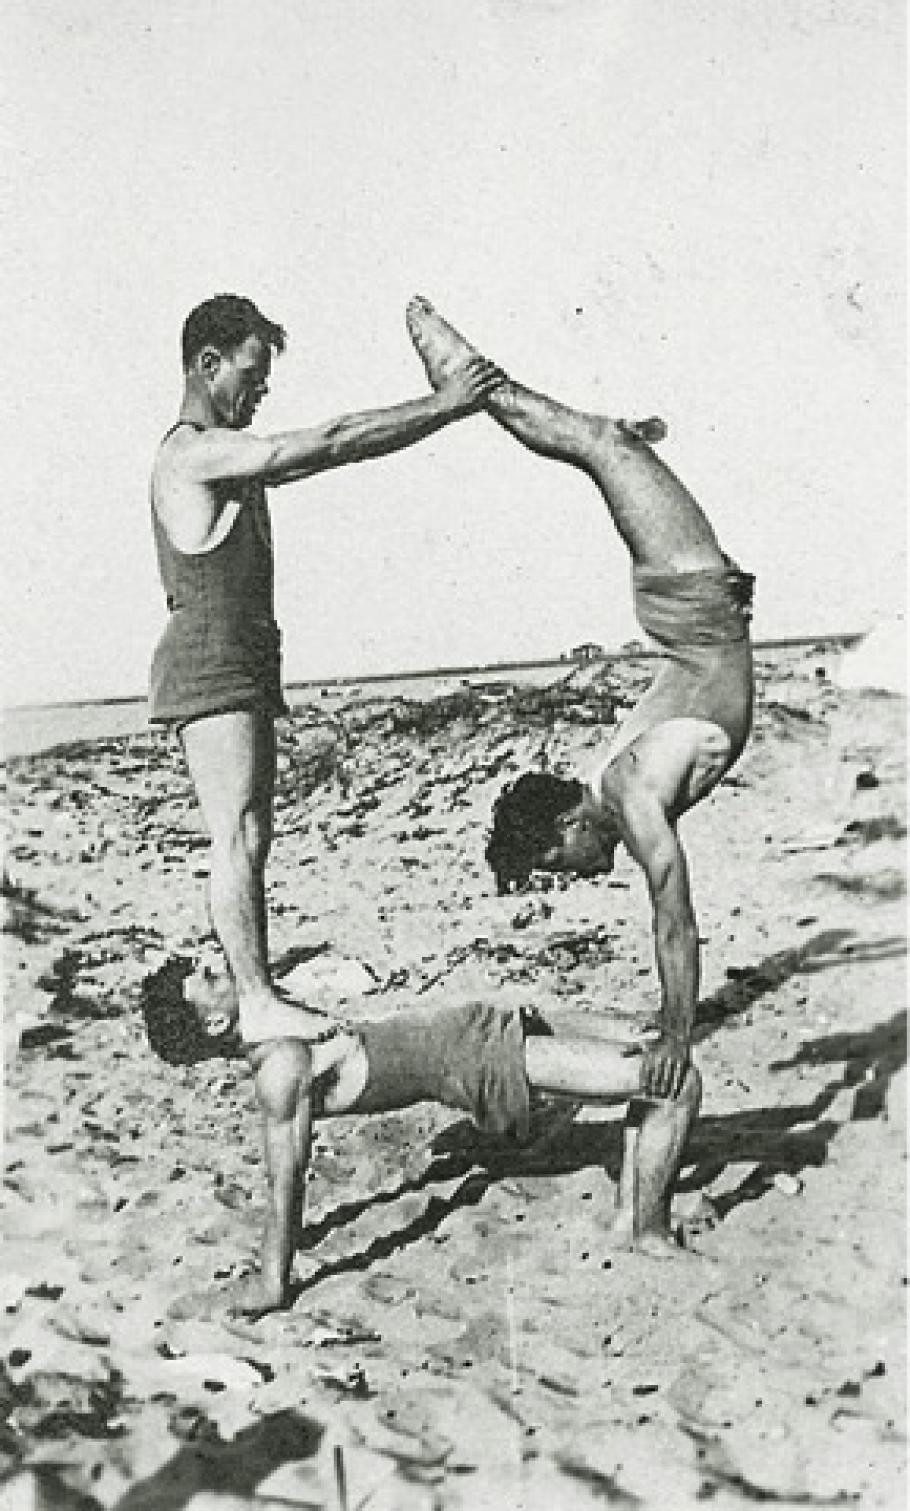 Doolittle and friends do tricks on the beach. Doolittle on the bottom holds up his other two friends who create a pyramid. 